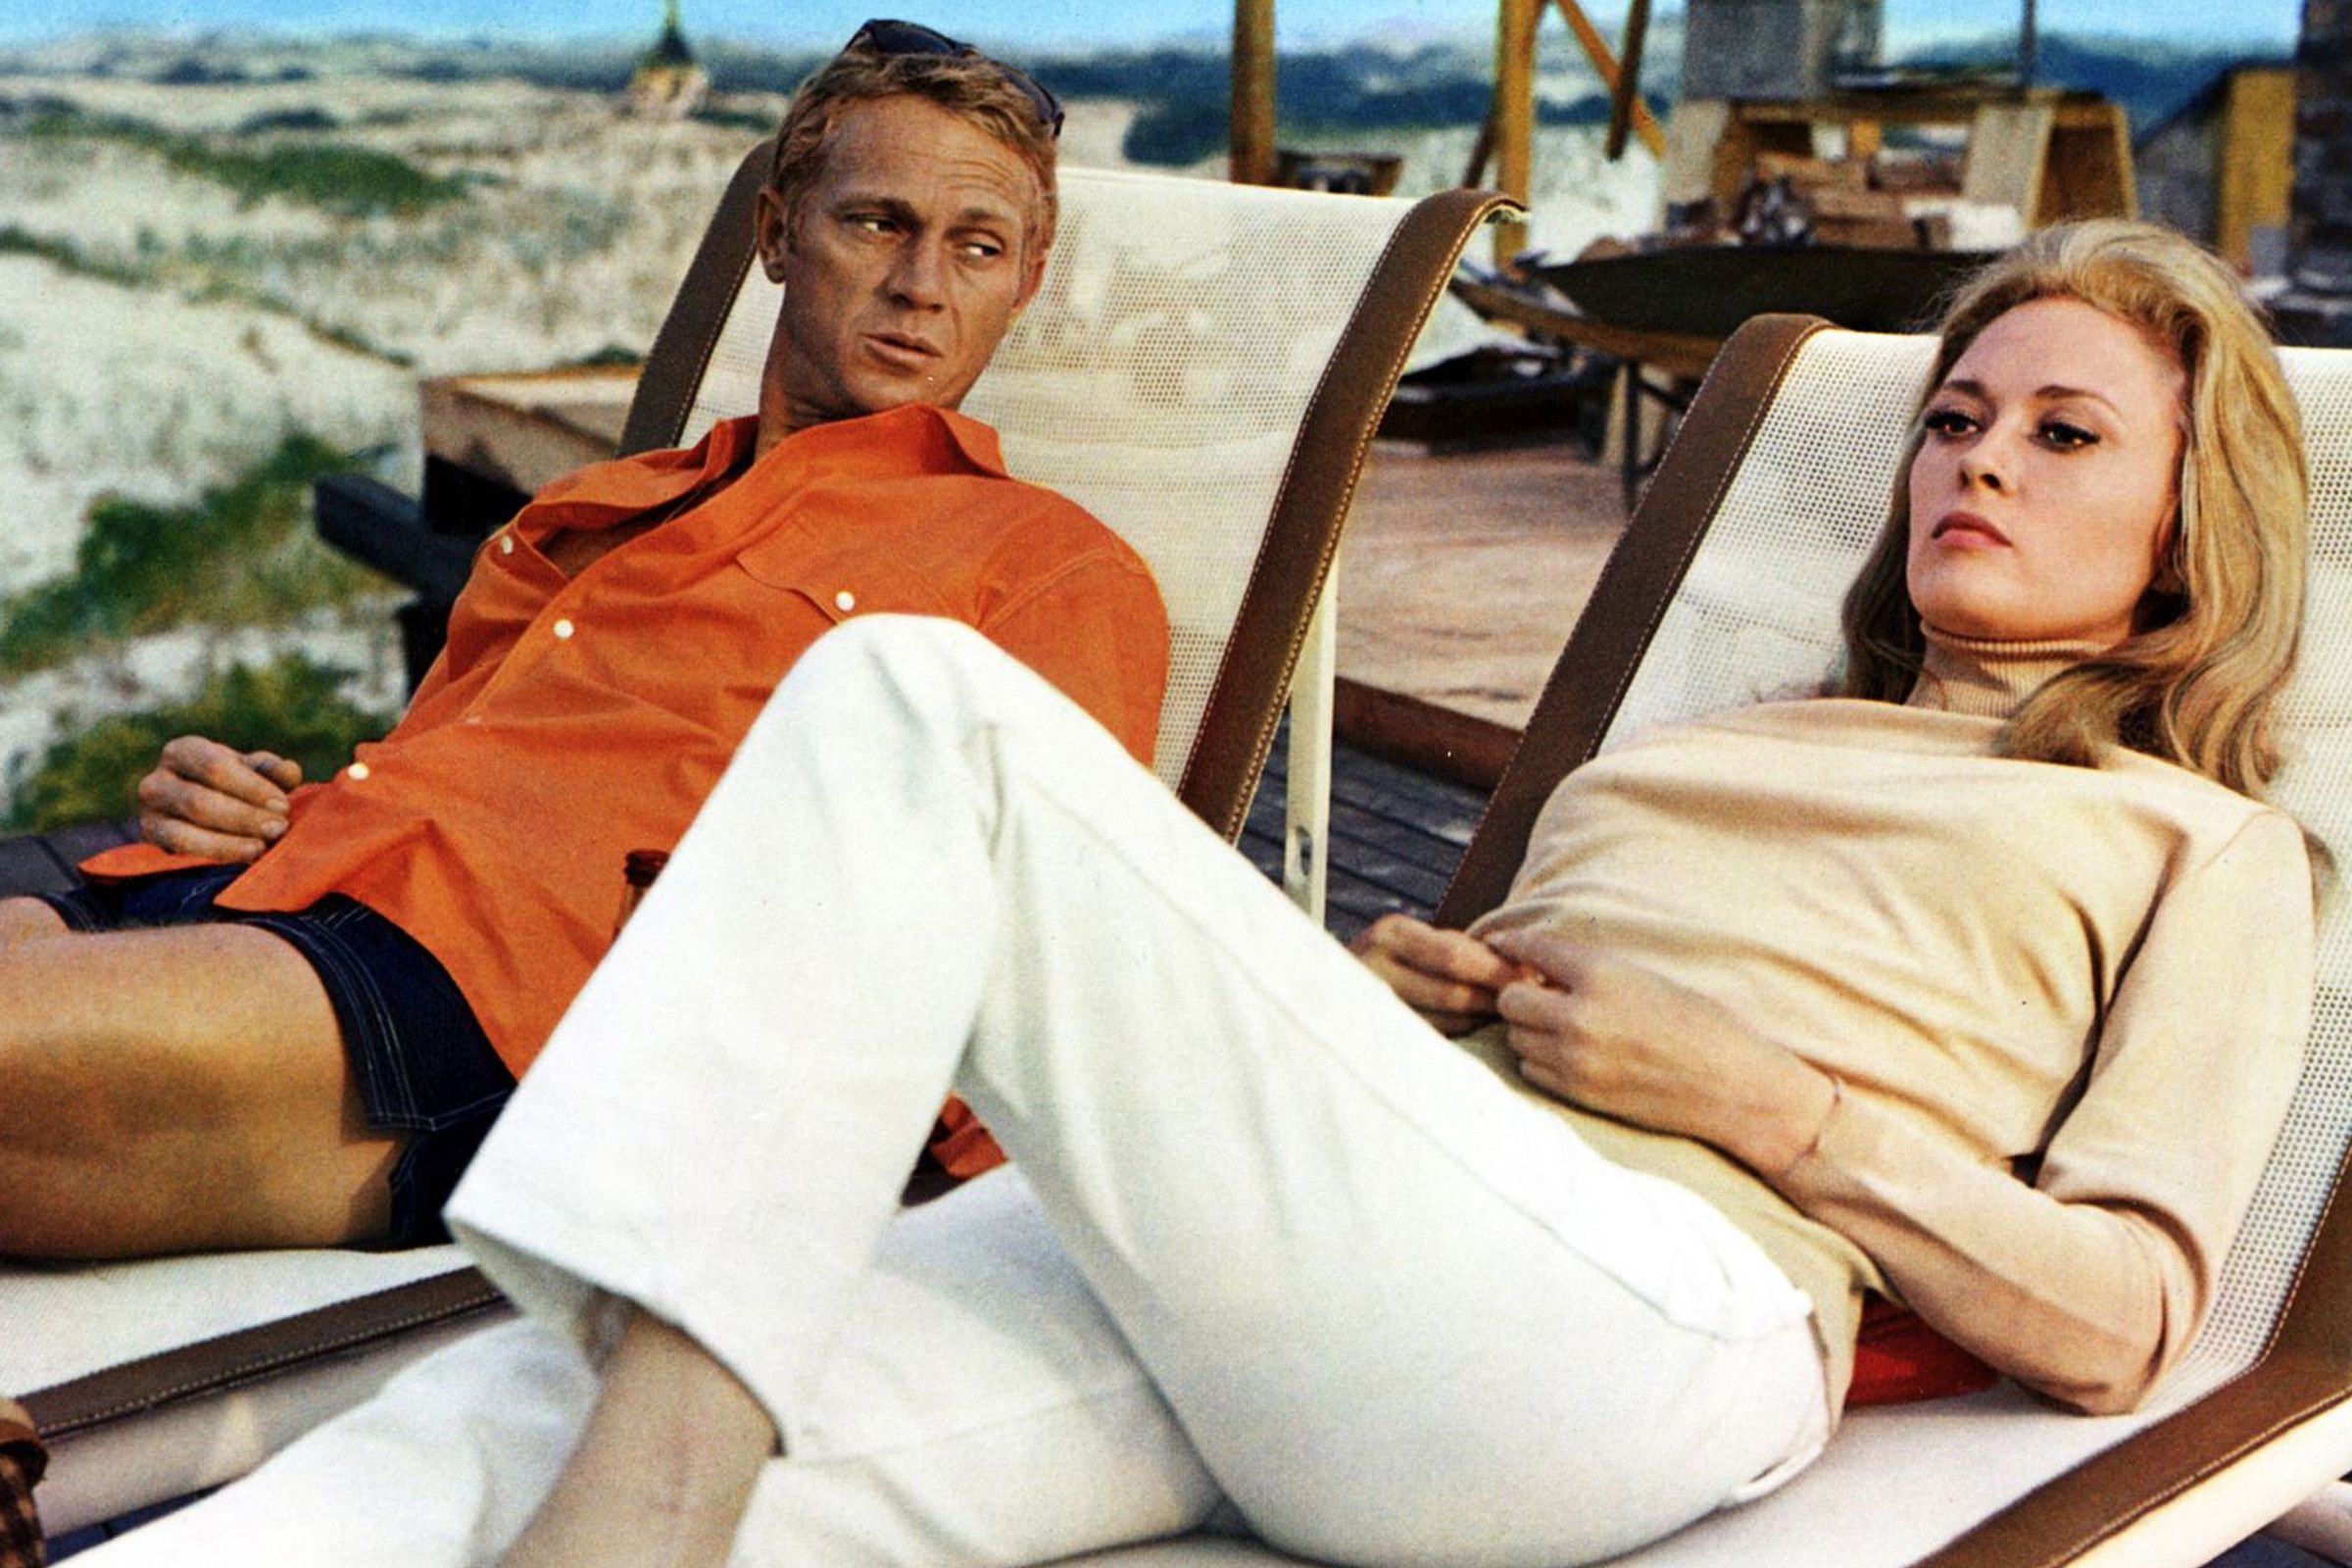 A Tale of Two Affairs: Comparing the Fashion of The Thomas Crown Affair (1968) to The Thomas Crown Affair (1999)